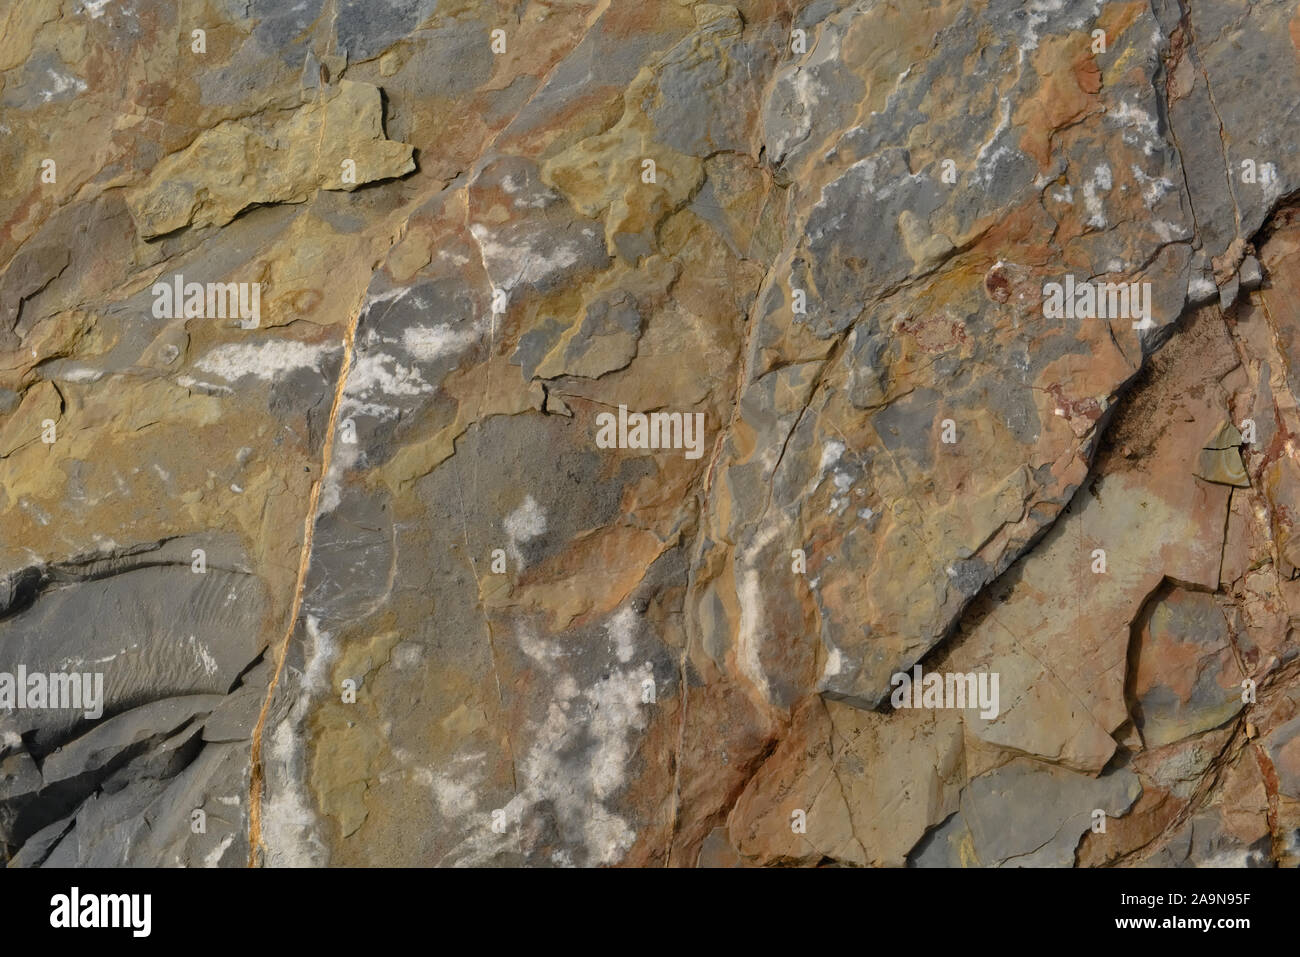 Multicolored natural stone texture background with shades of orange, yellow, grey and white Stock Photo